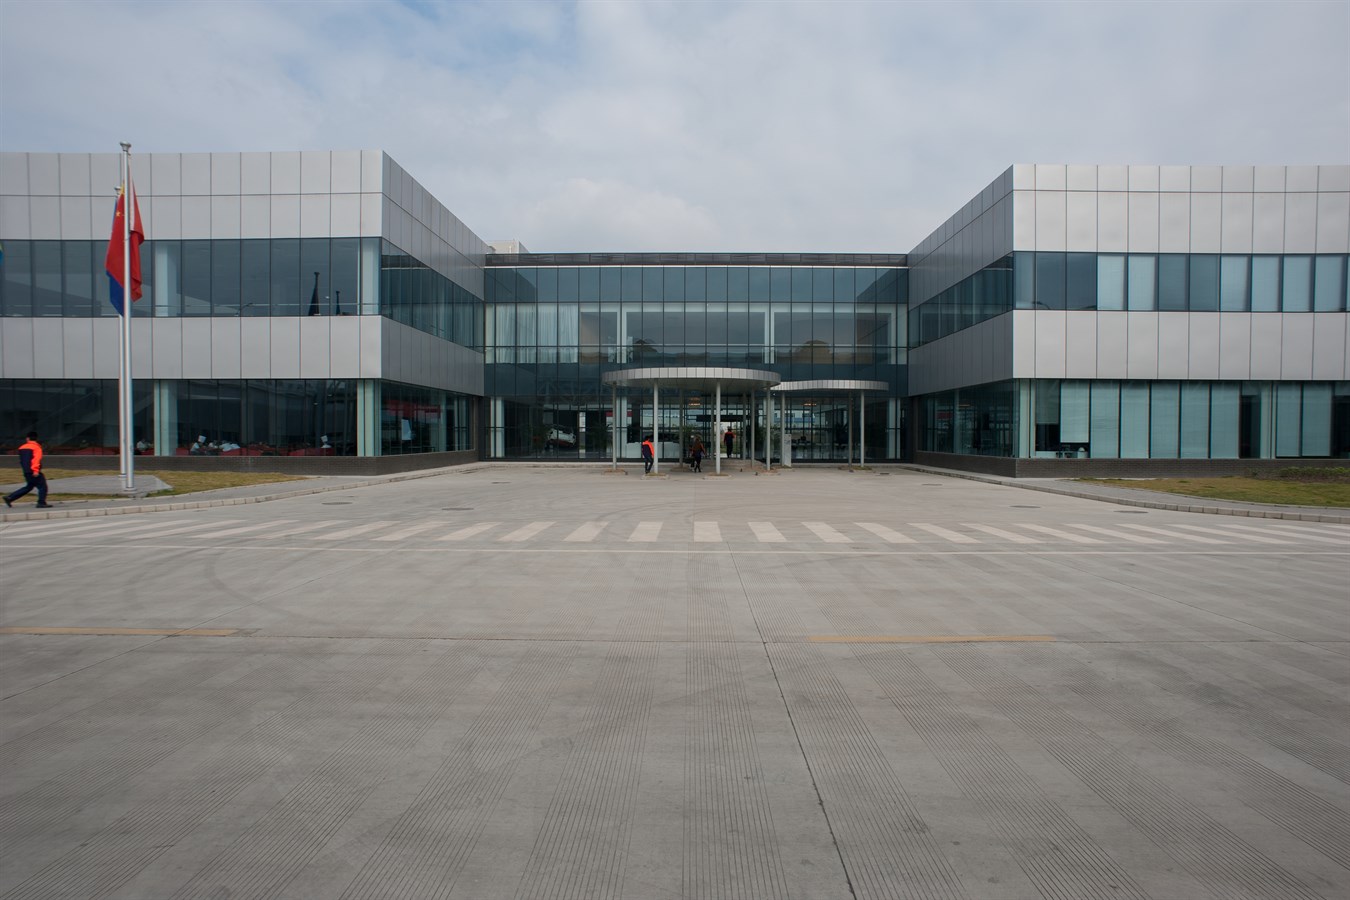 Volvo Cars manufacturing plant in Chengdu